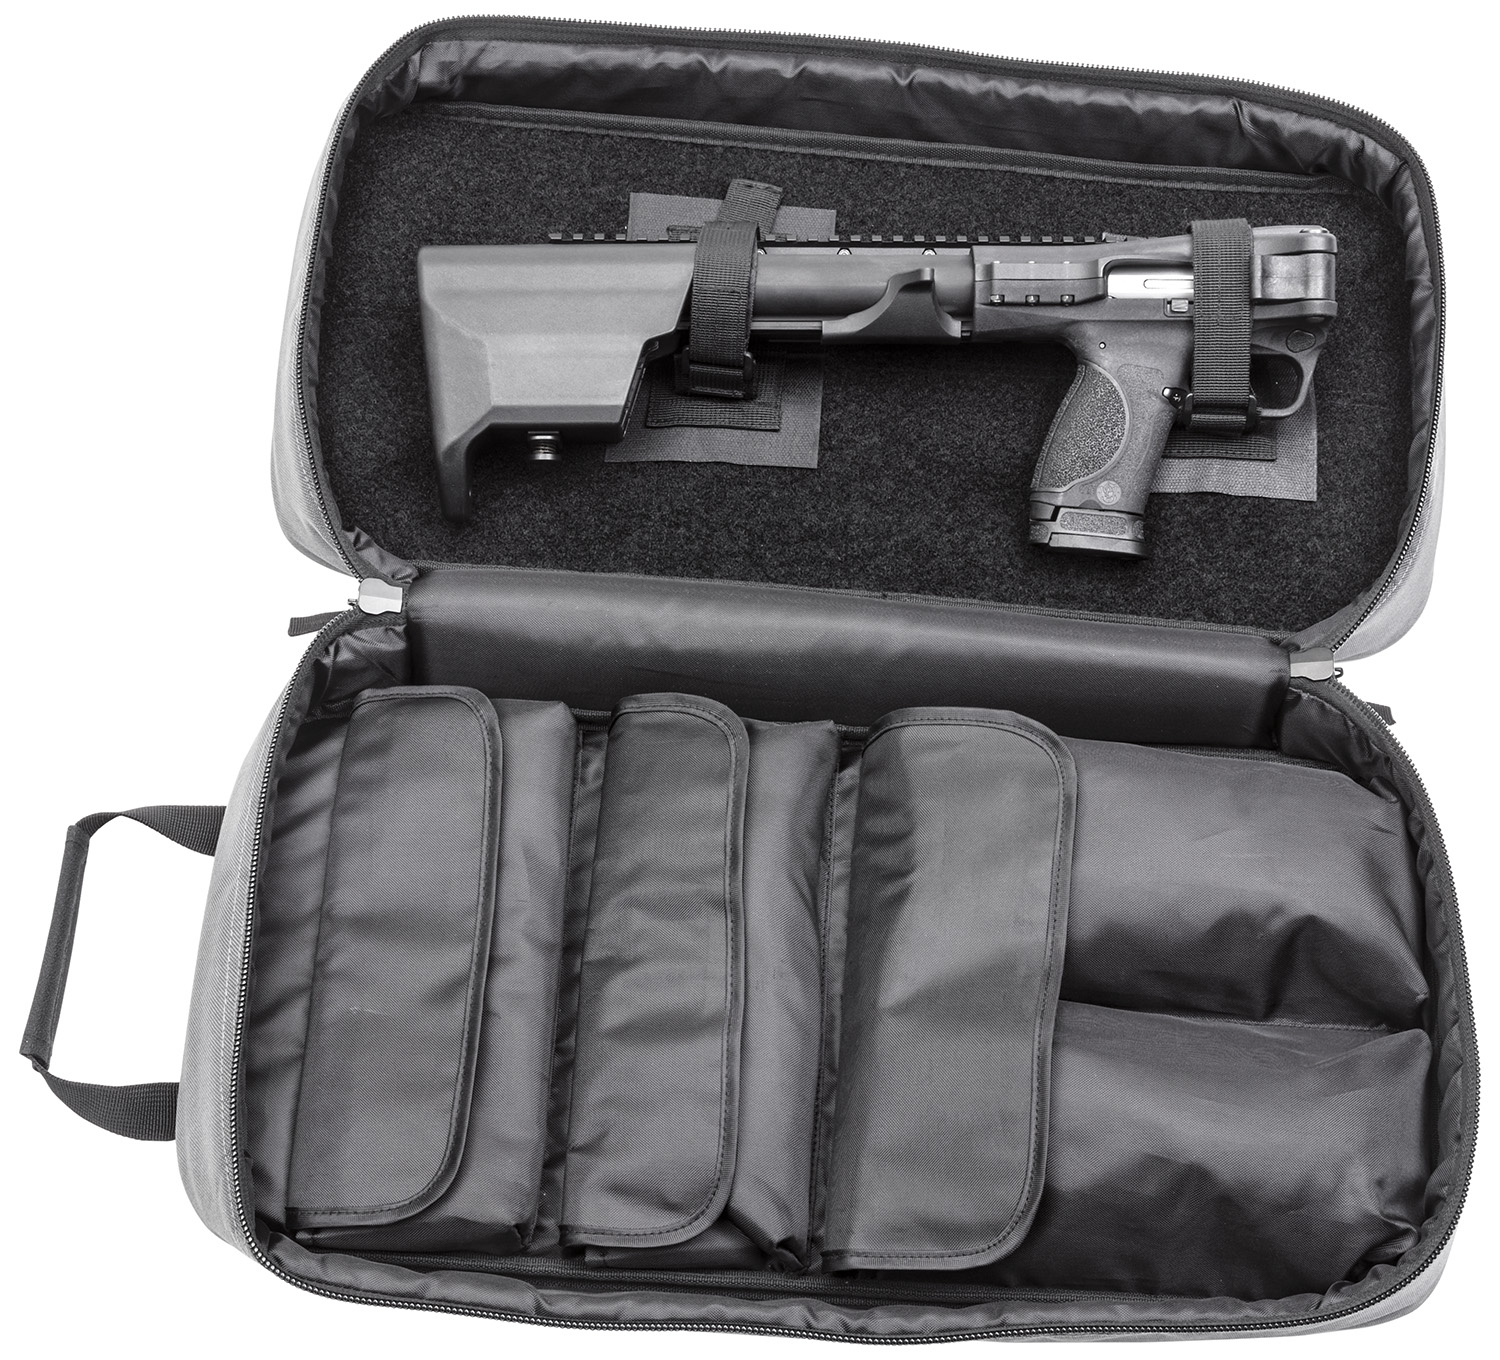 Smith & Wesson M&P FPC 9mm Luger 17 Rd(1)/ 23Rd(2), 16.25" Barrel, Adjustable Stock, with Picatinny Style Rail